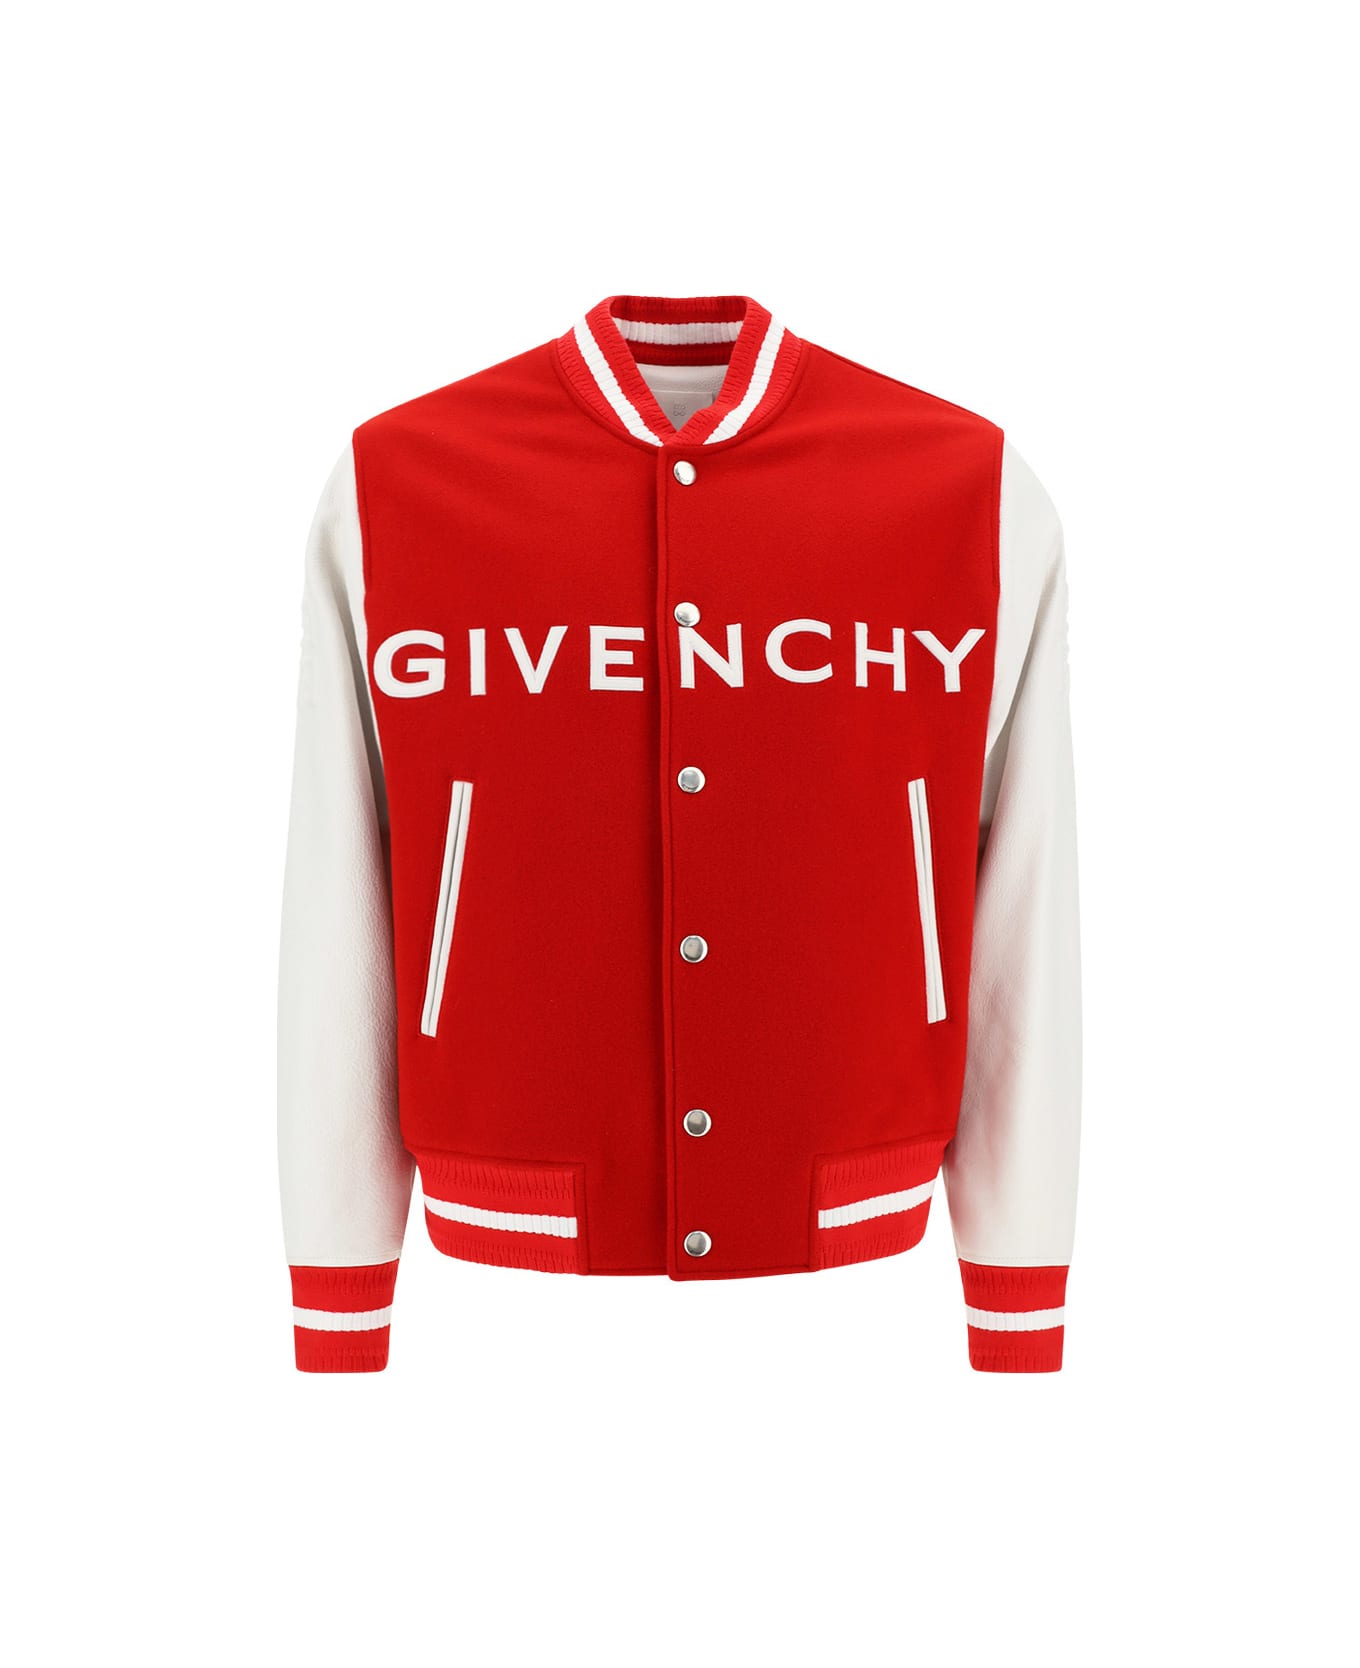 Givenchy Varsity College Jacket - White/red